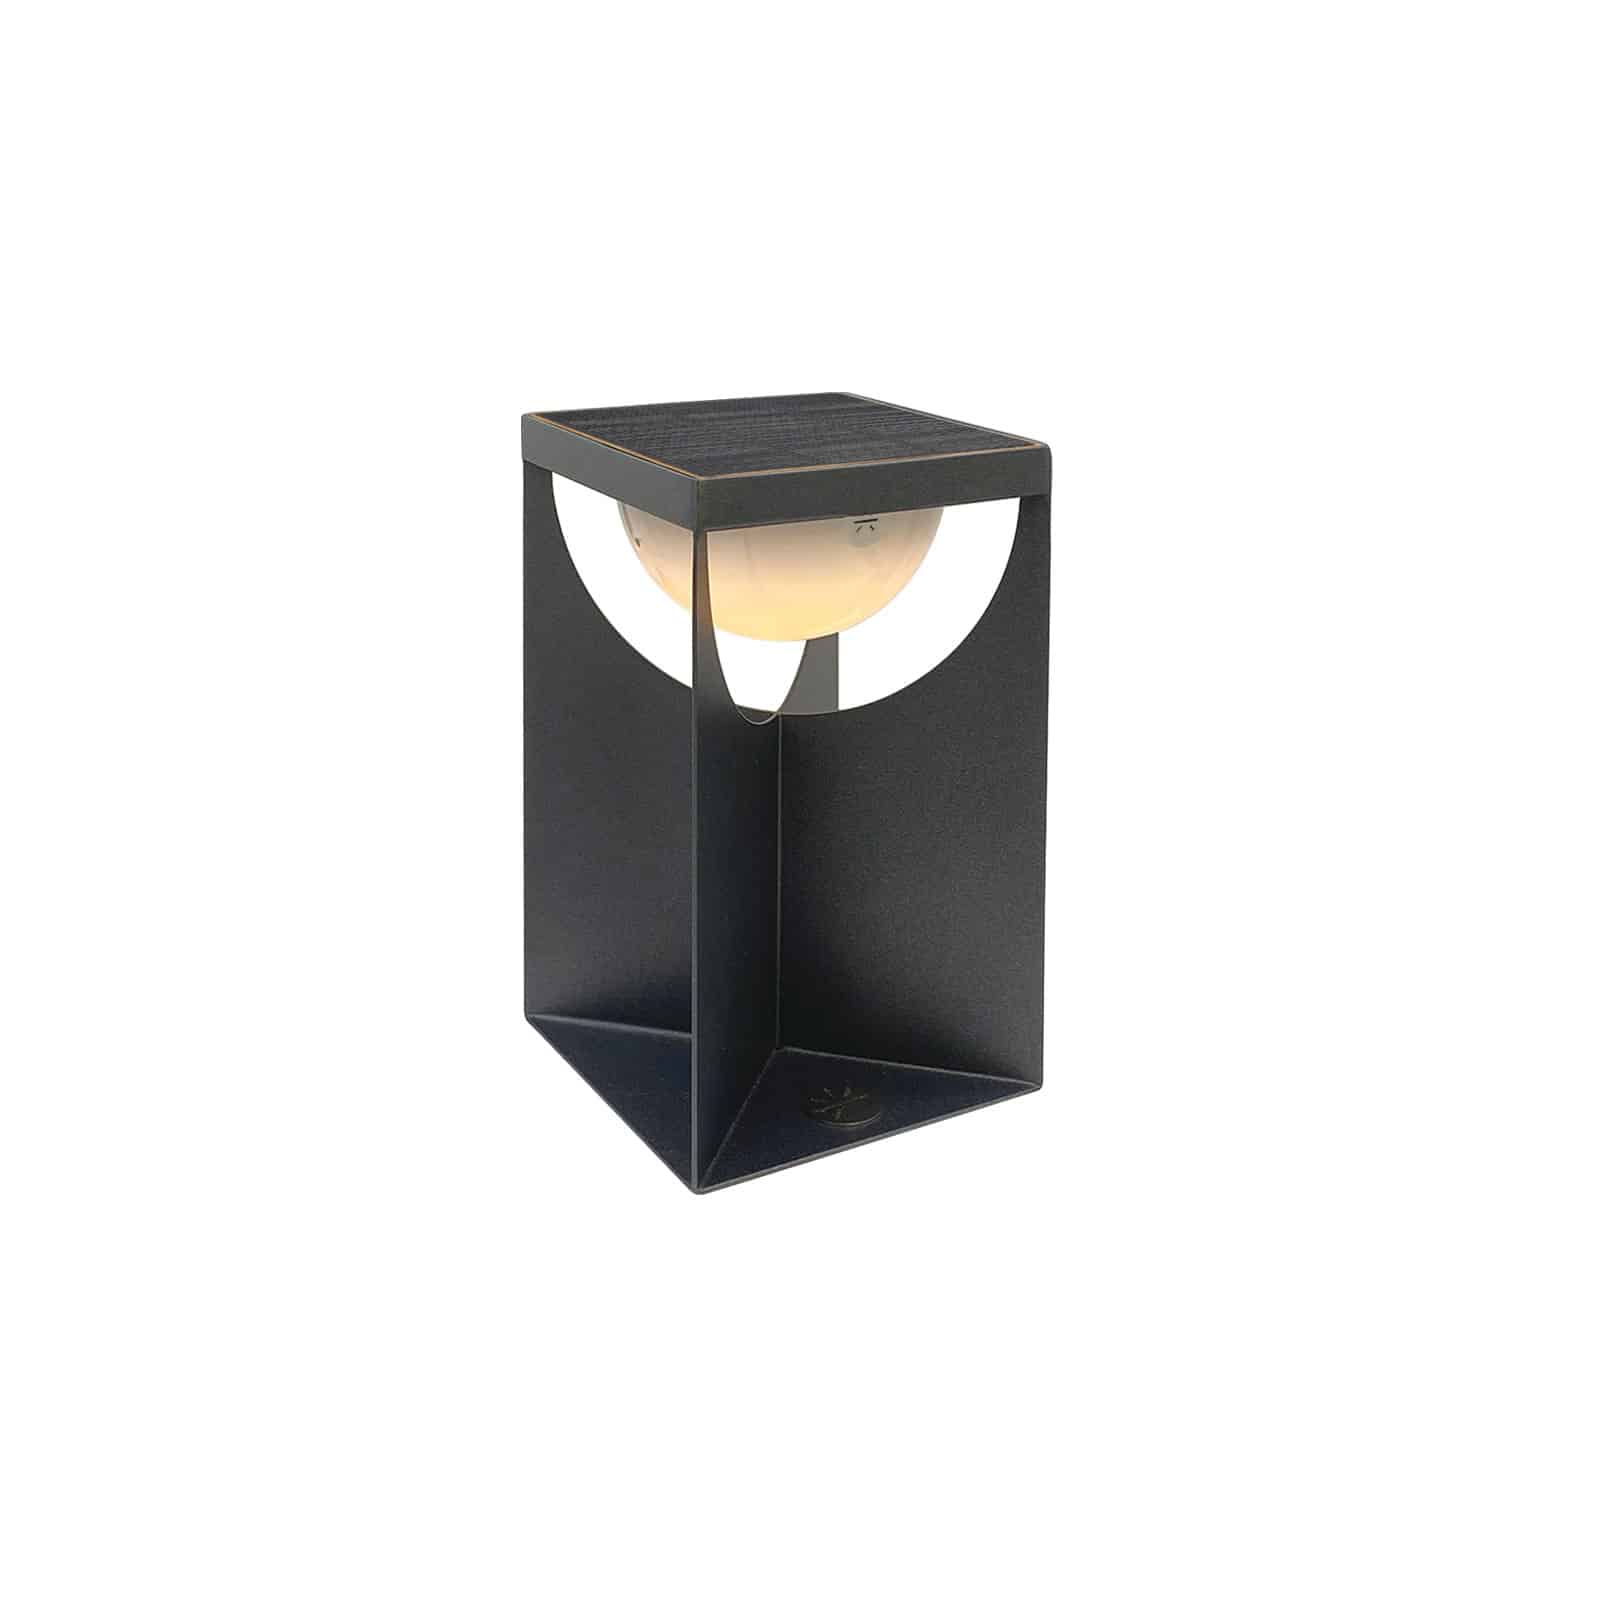 Flow table lamp in graphite finish